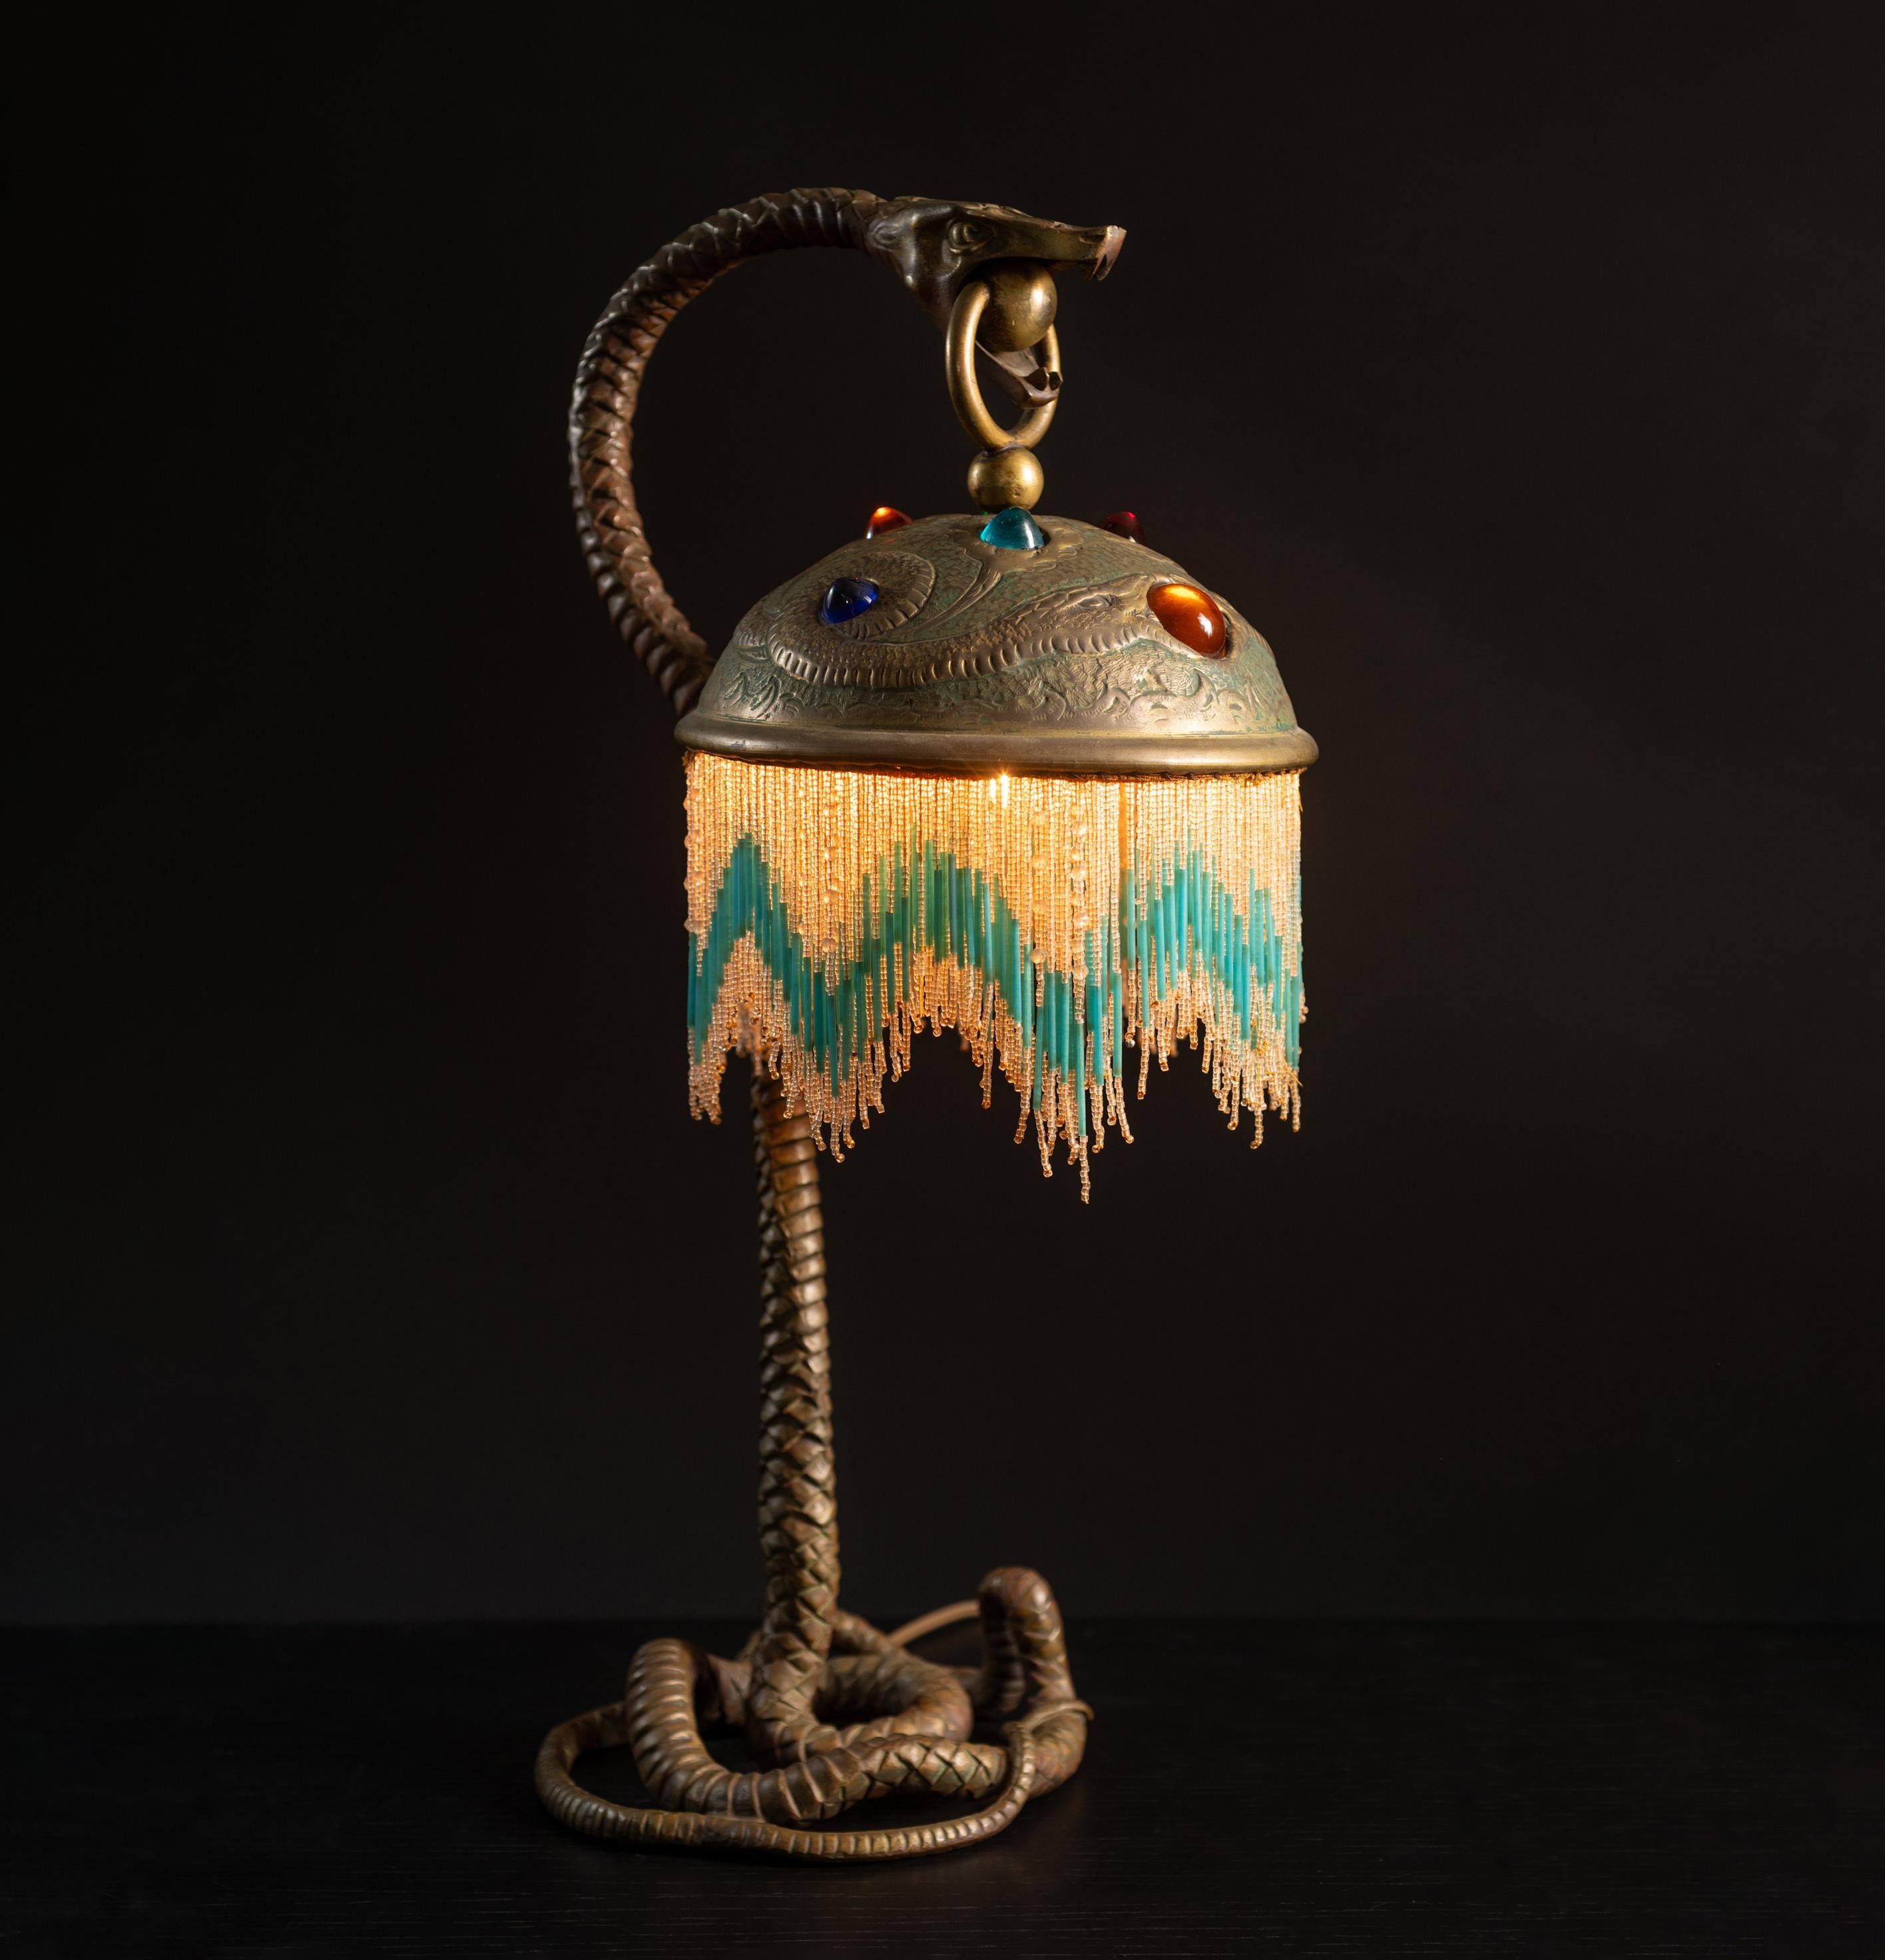 Little is known about the origins of this amazing lamp, apart from it being from France, circa 1900.